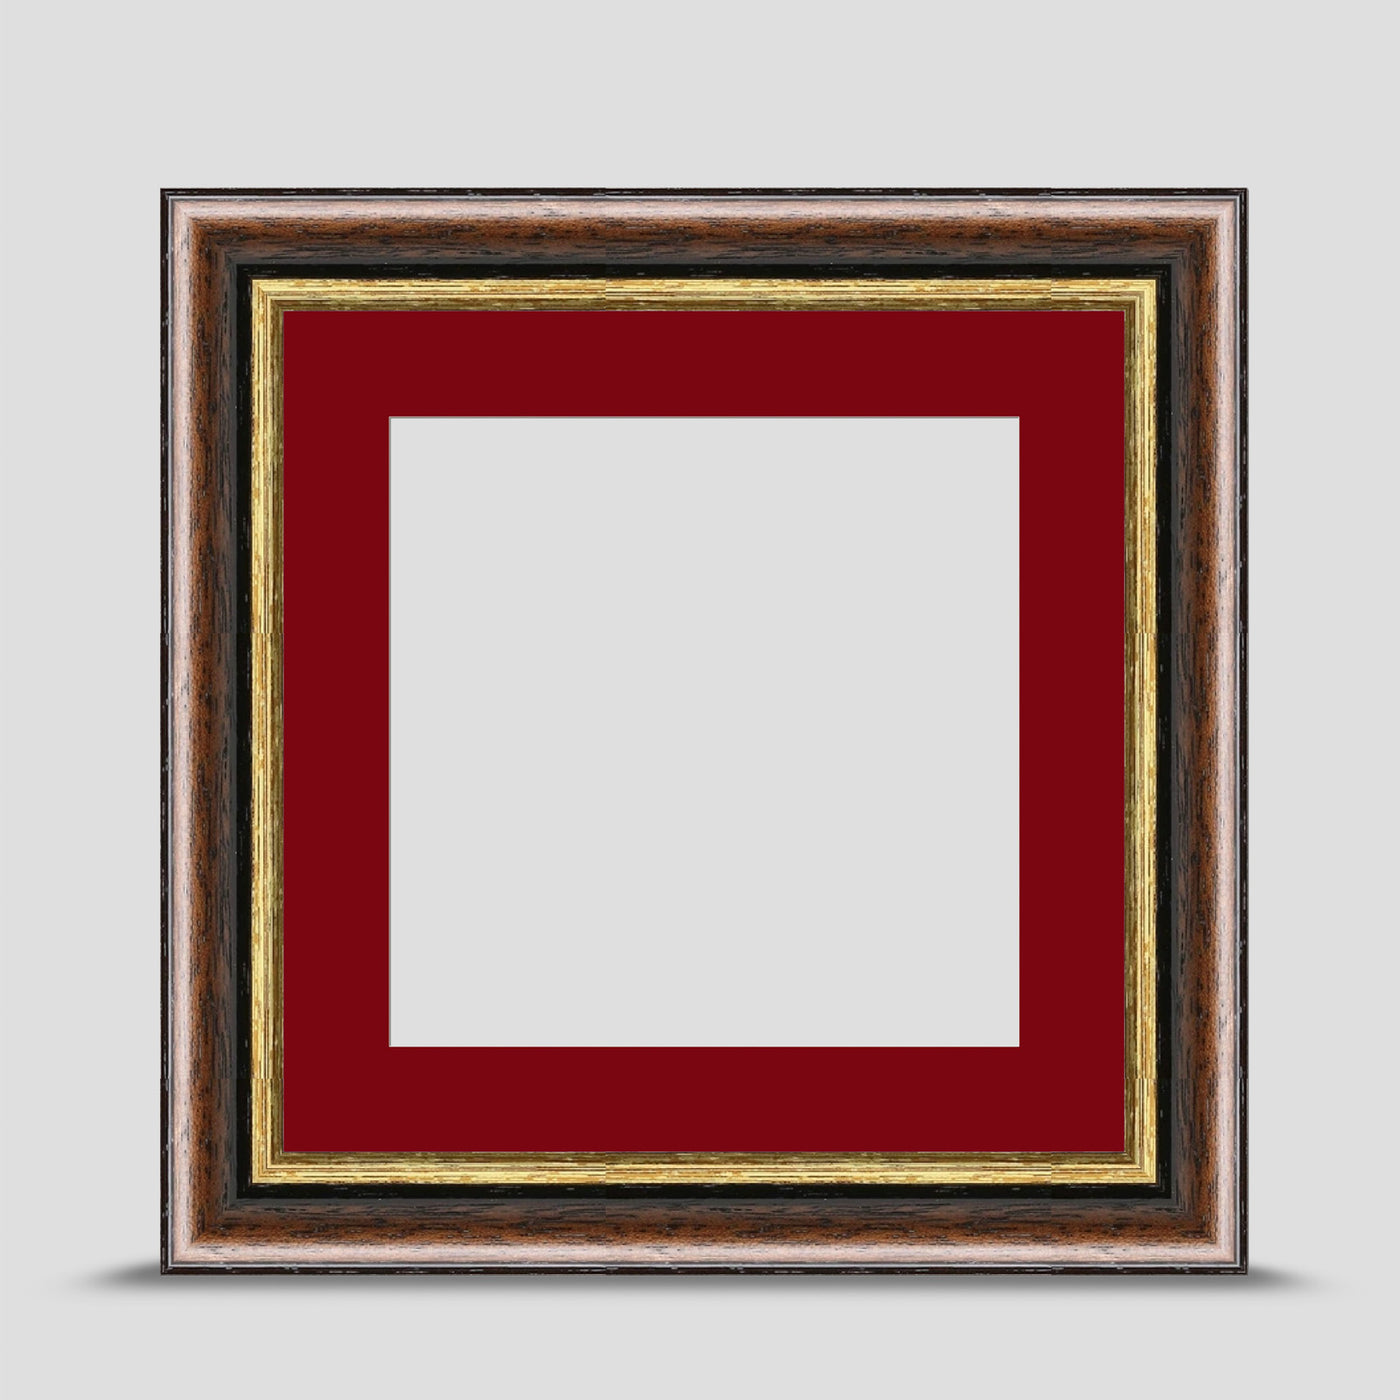 7x7 Brown & Gold Picture Frame with a 5x5 Mount